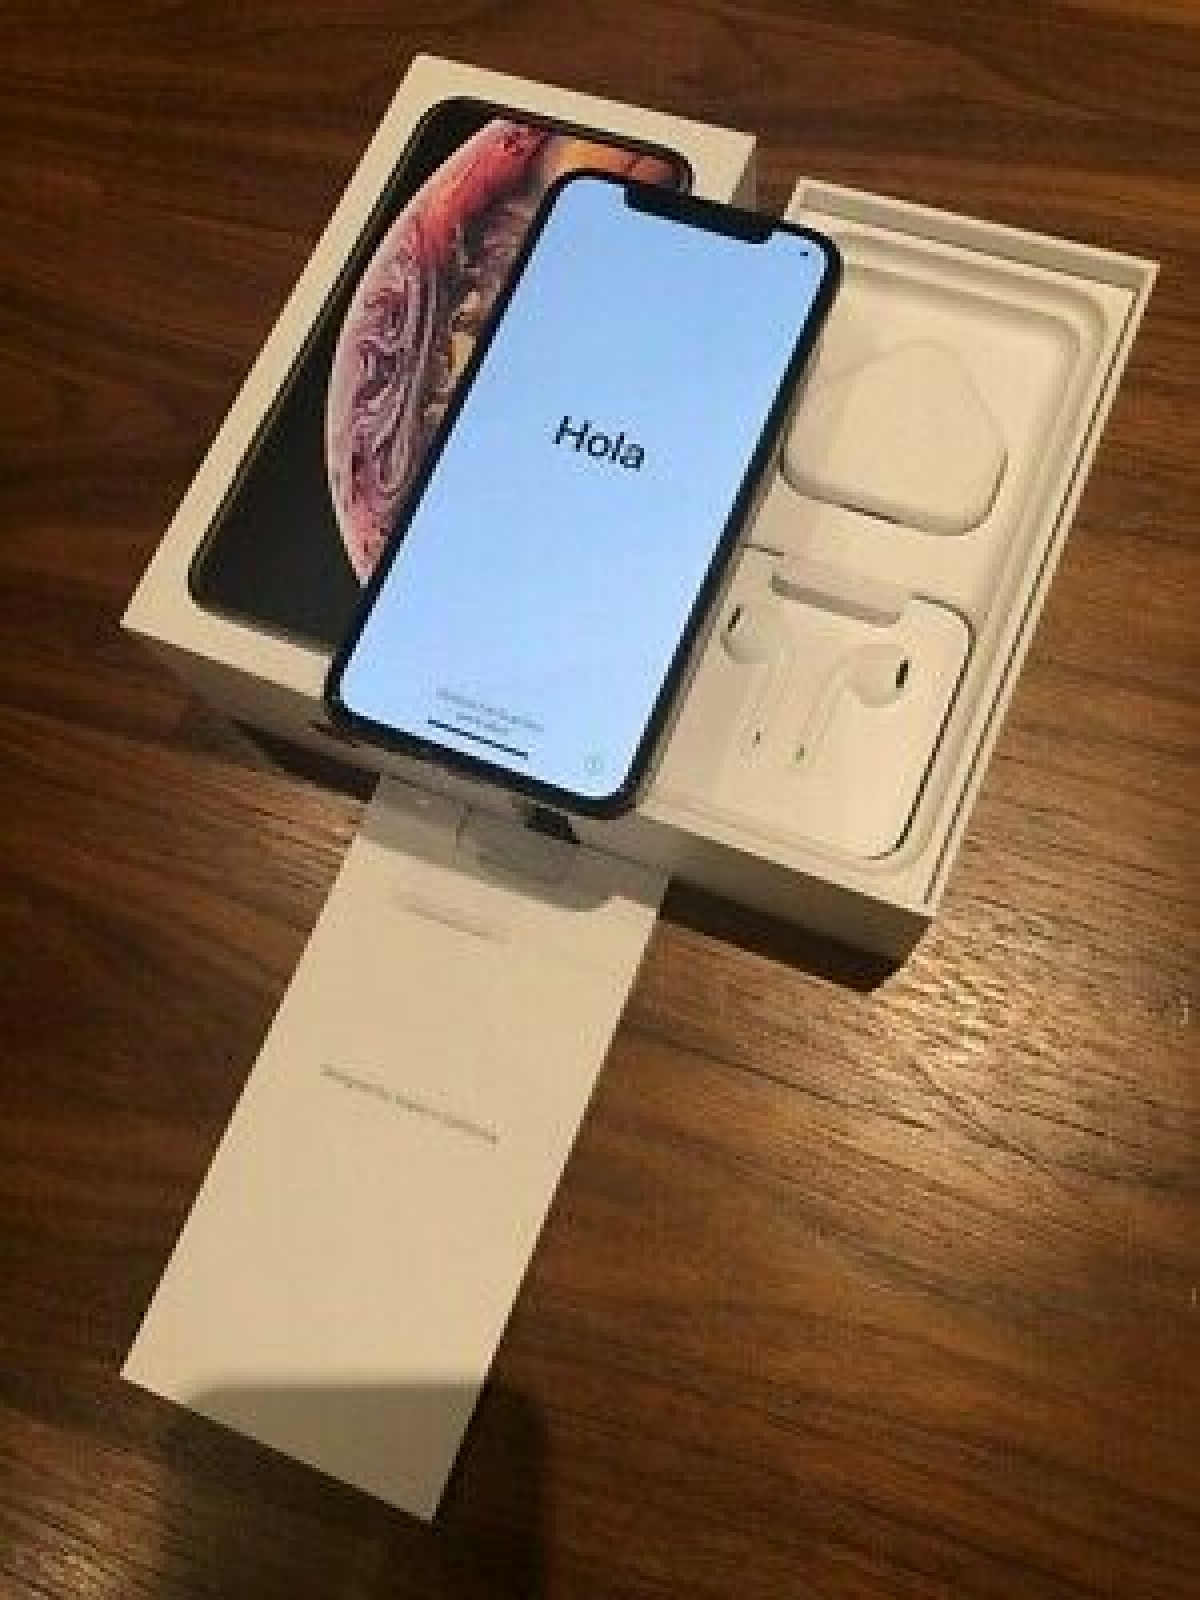 Apple iphone xs max 512GB for sale in Kingston Kingston St Andrew - Phones